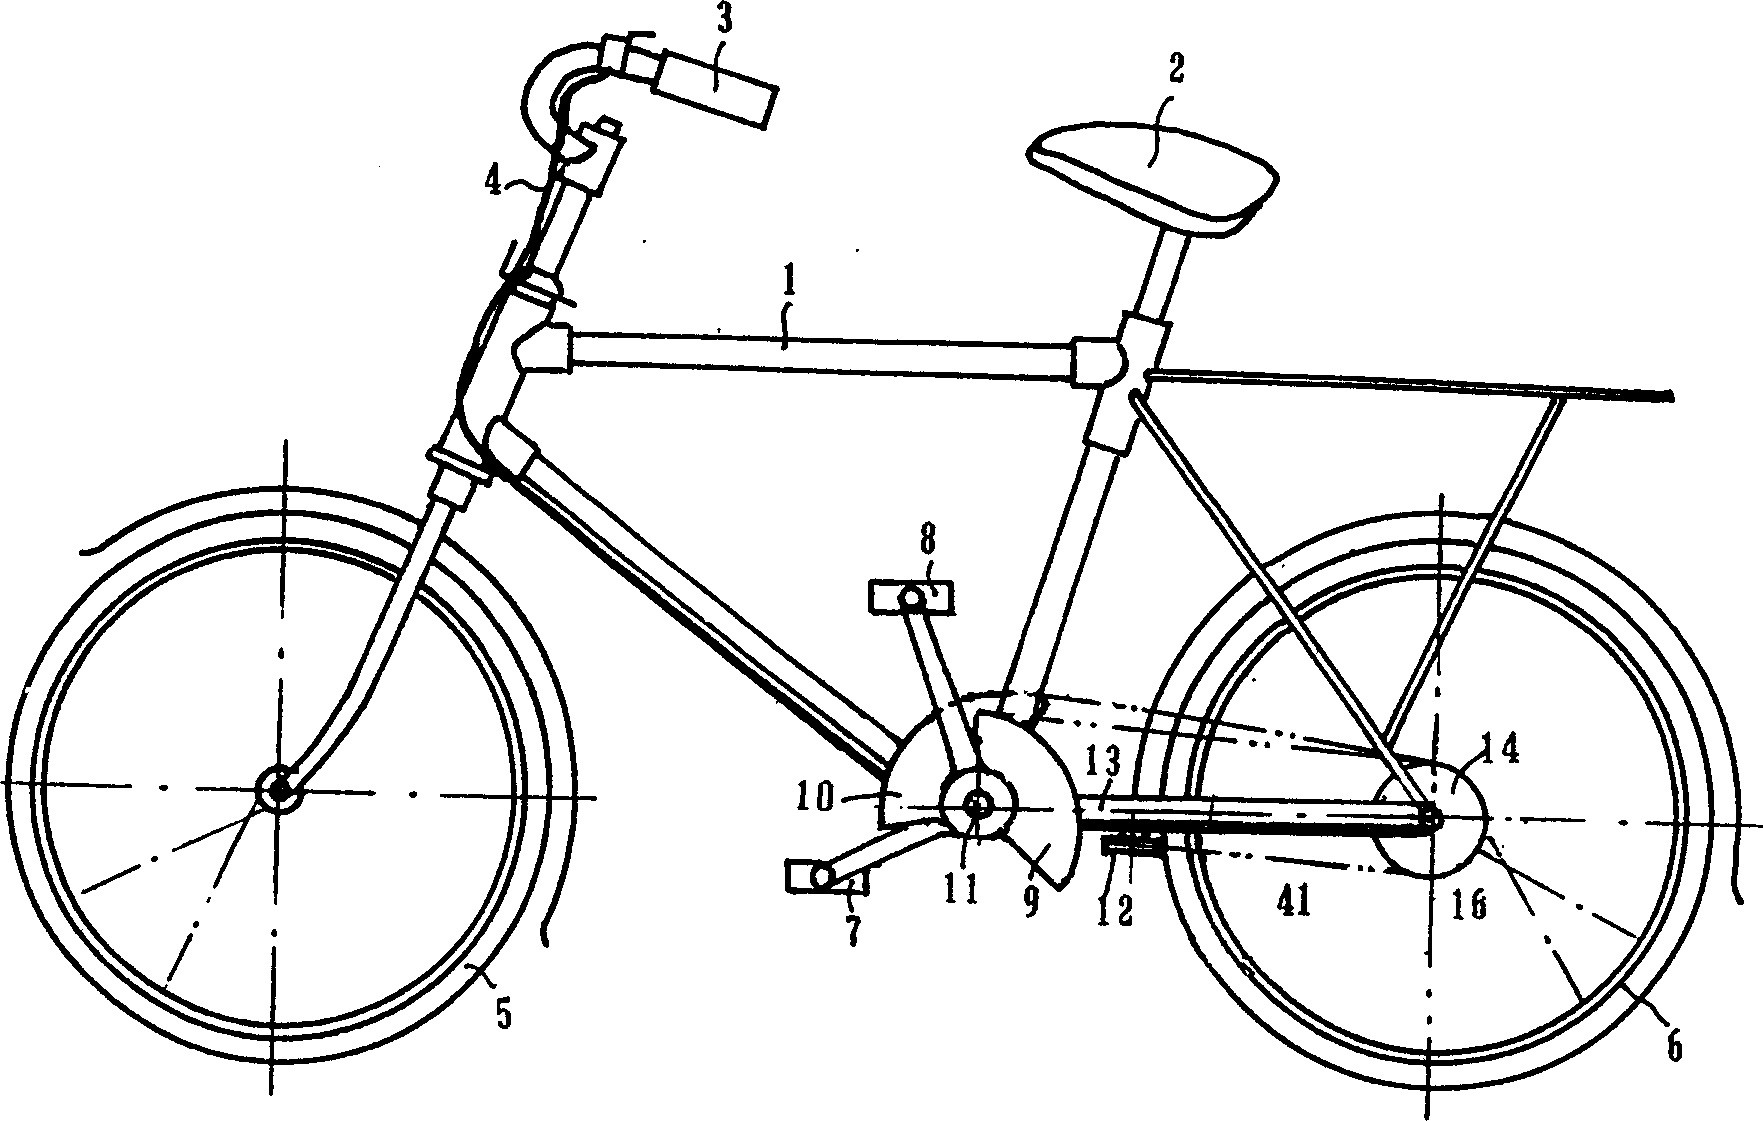 Reciprocating footoperated bicycle with dual flywheels